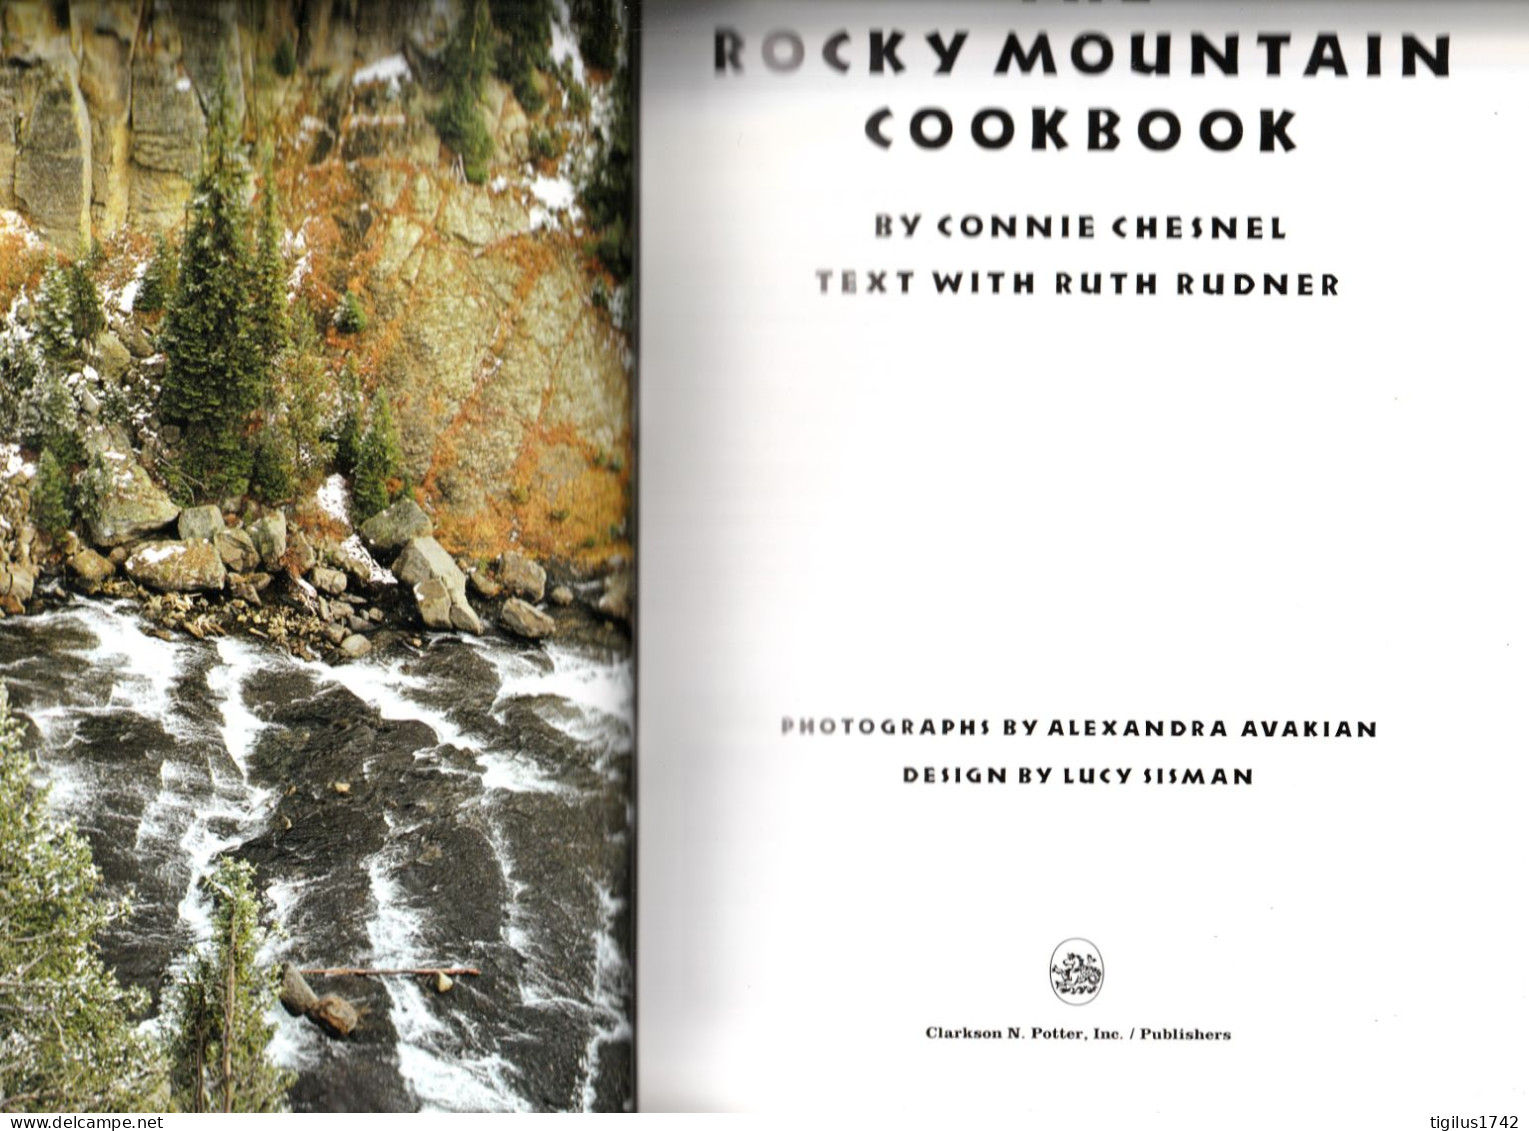 Chesnel Connie And Rudner Ruth. The Rocky Mountain Cookbook. Potter éd., 1988 - Noord-Amerikaans